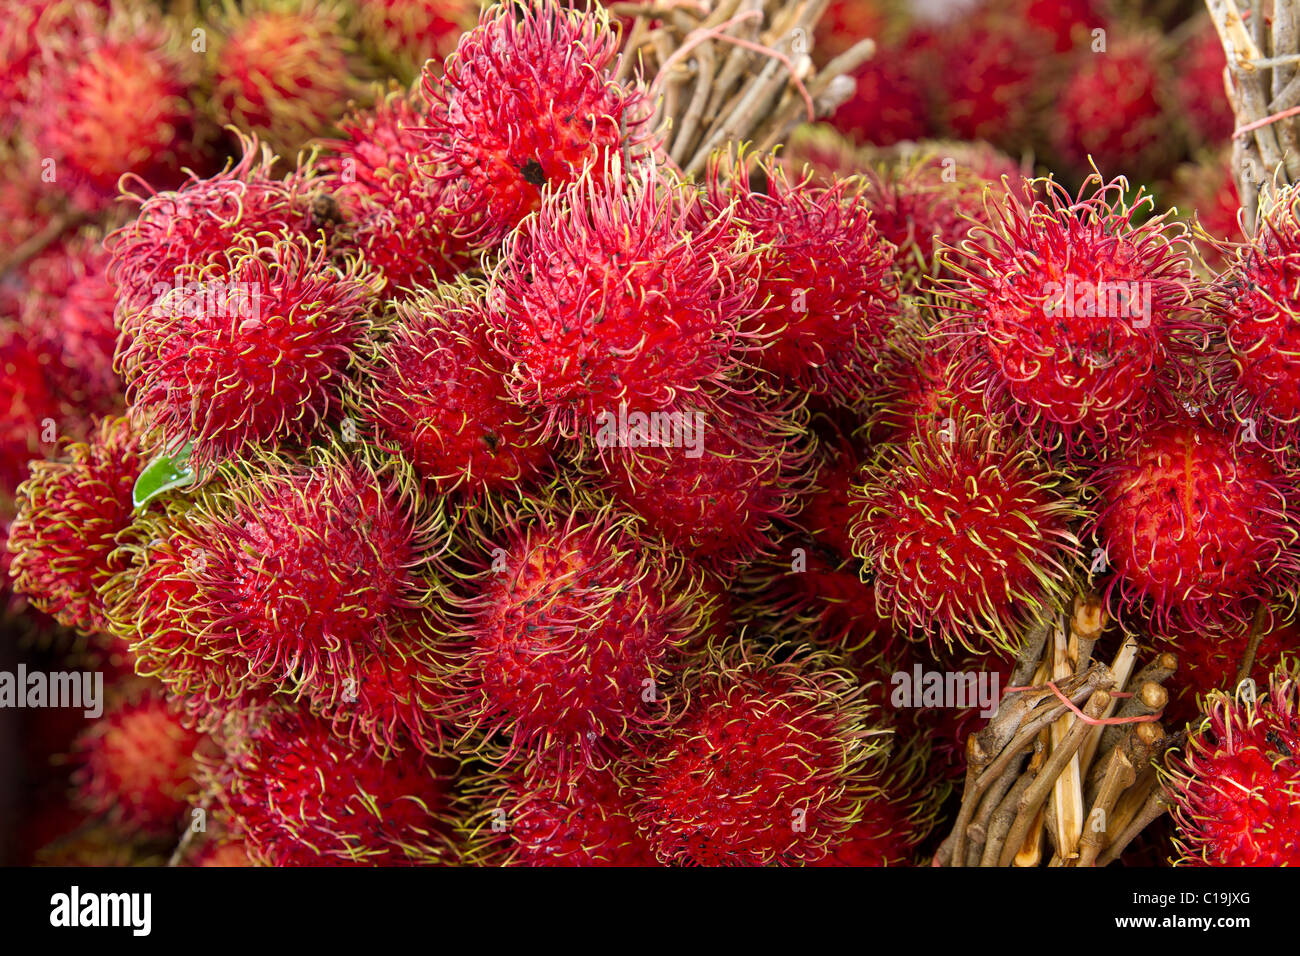 Rambutan on Fruit Stand in Tropical Country Stock Photo